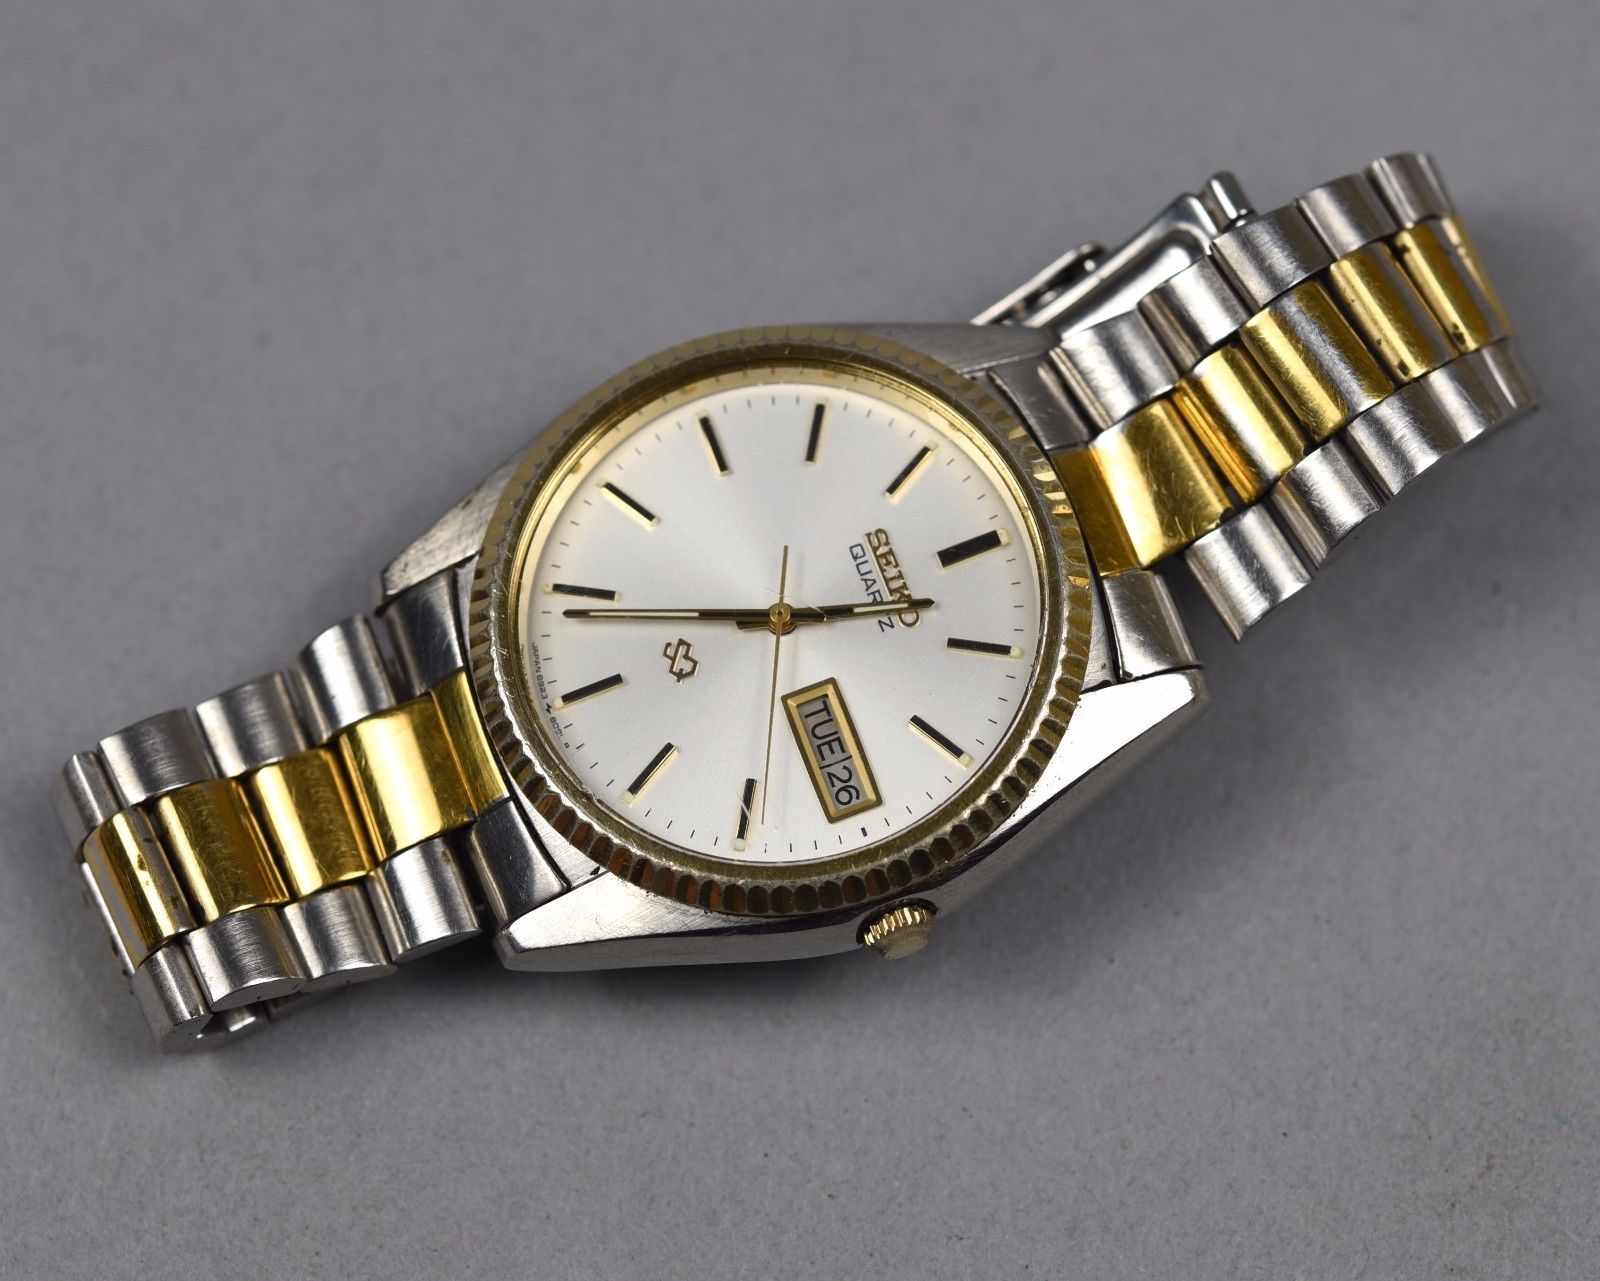 1967 SEIKO WATCH | Expat Journal: Postcards from the Edge